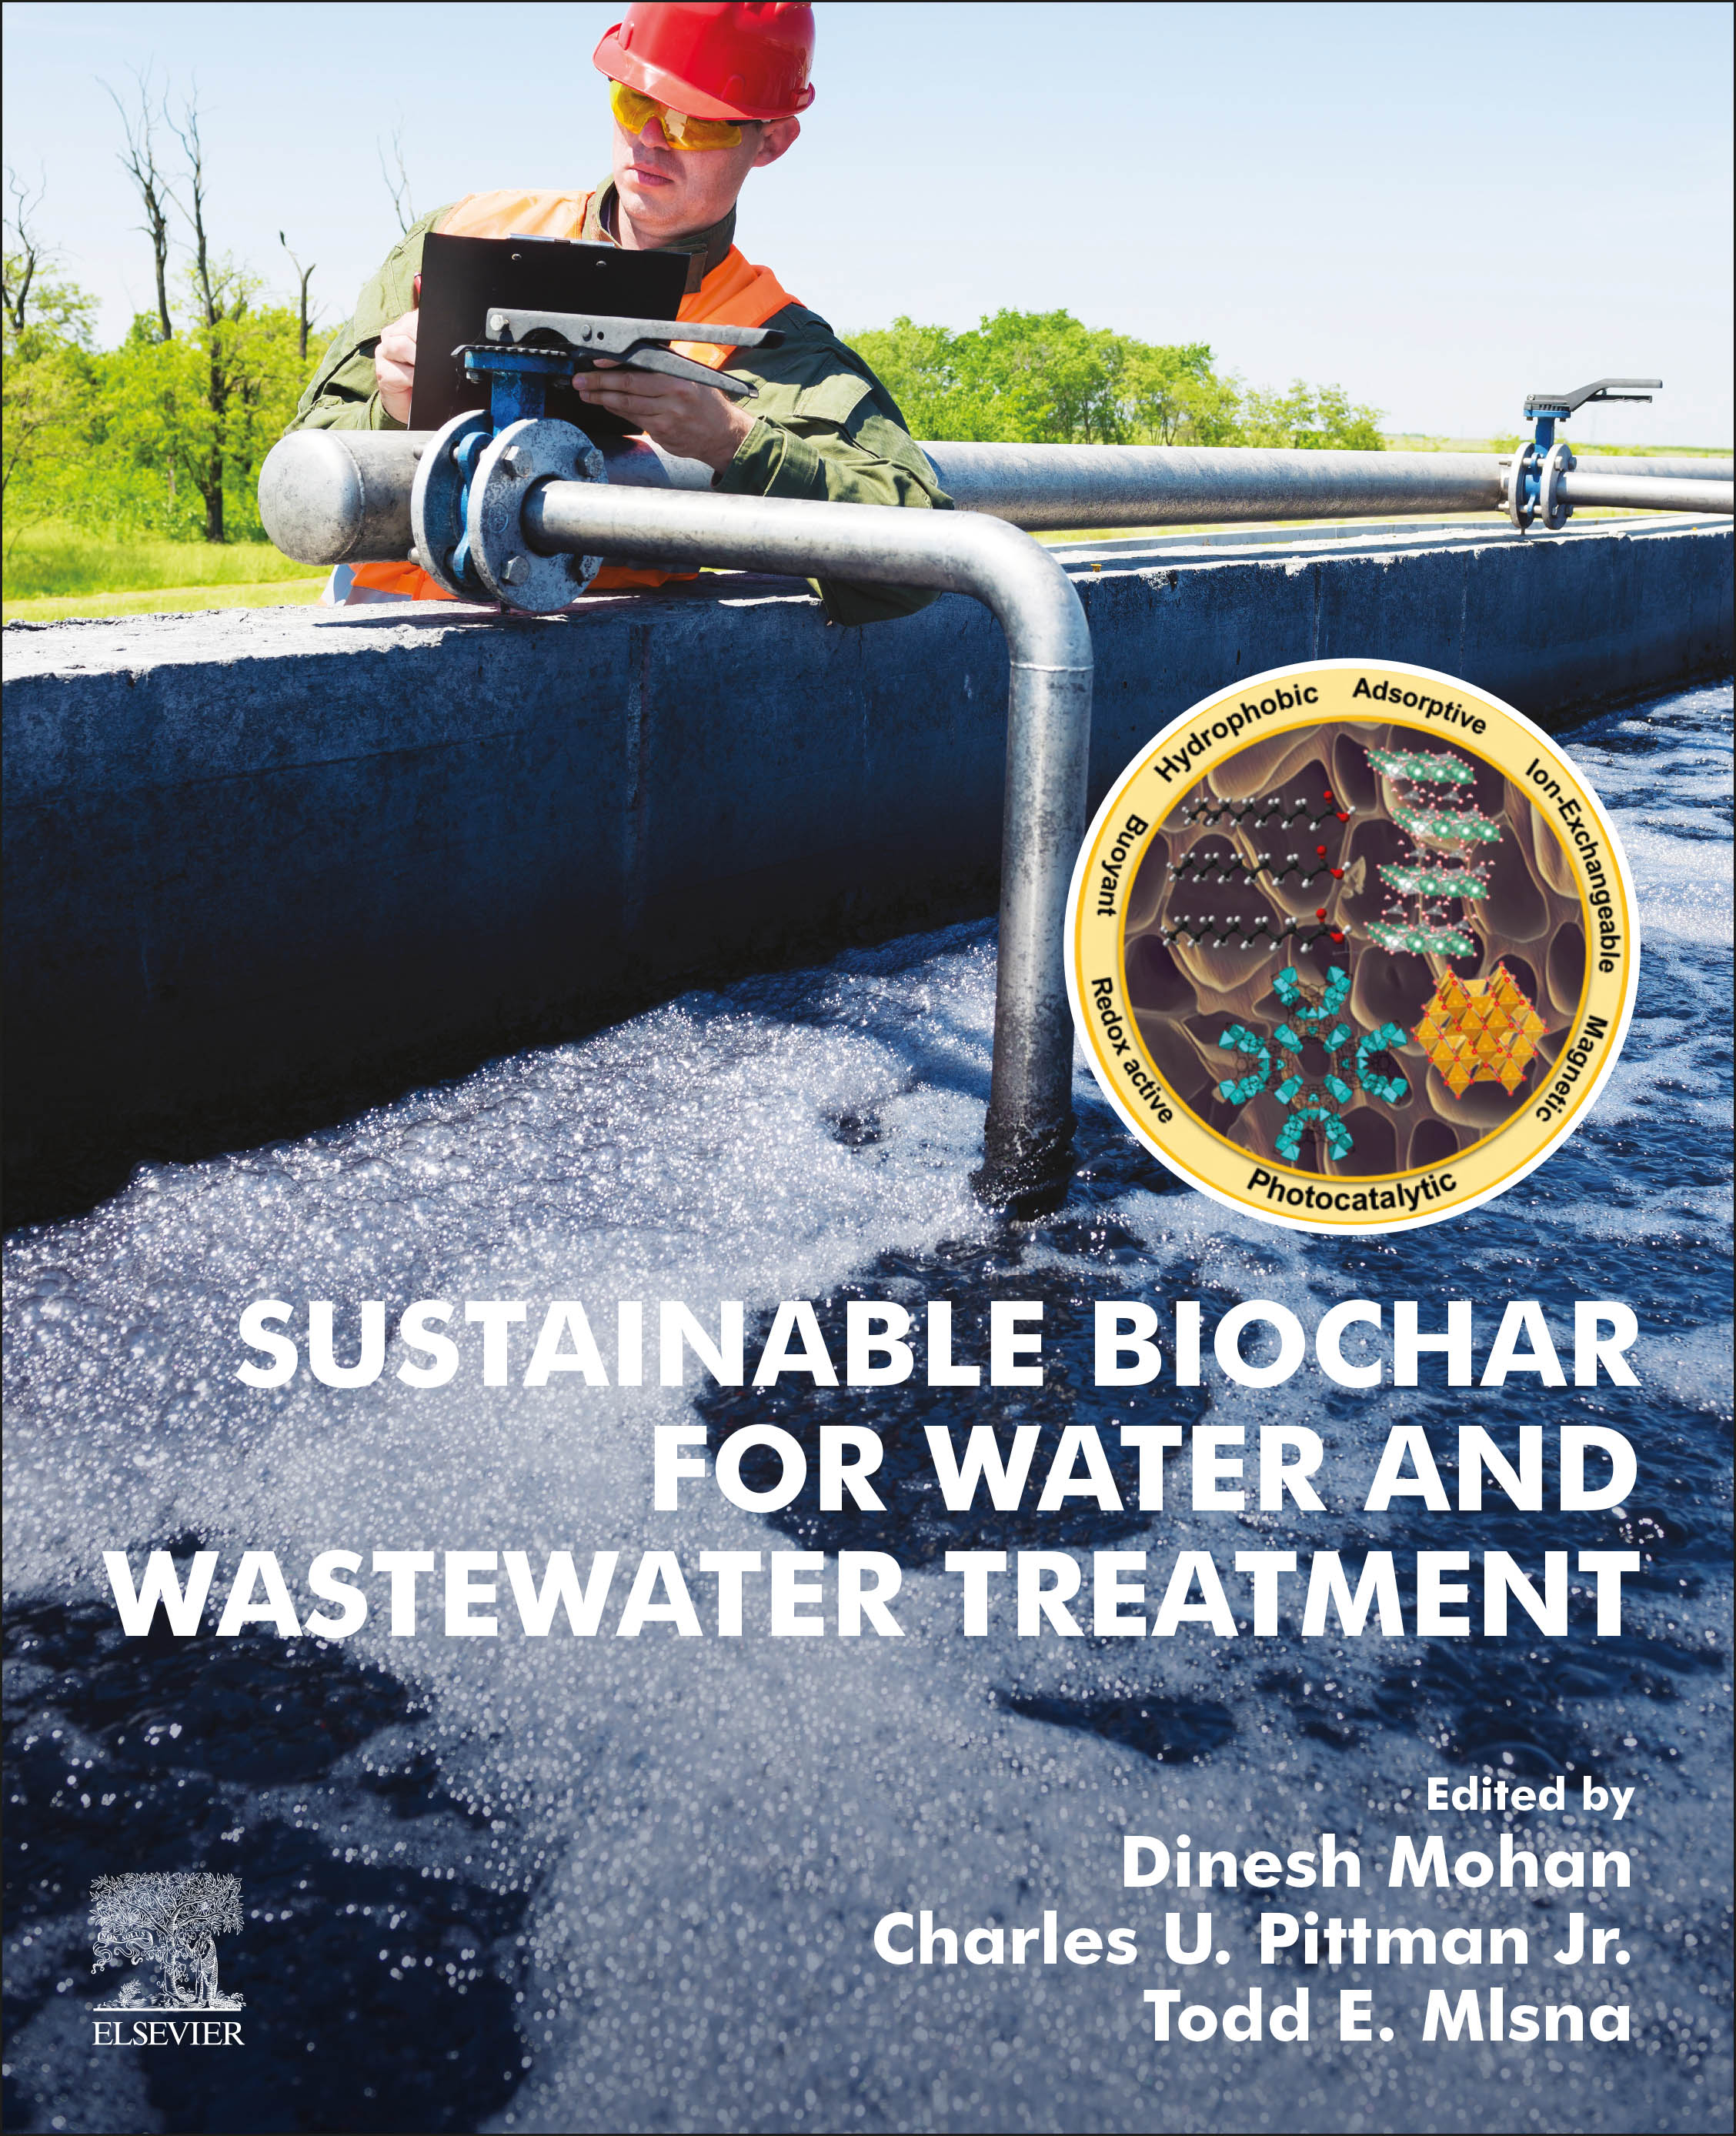 Sustainable Biochar for water and wastewater treatment